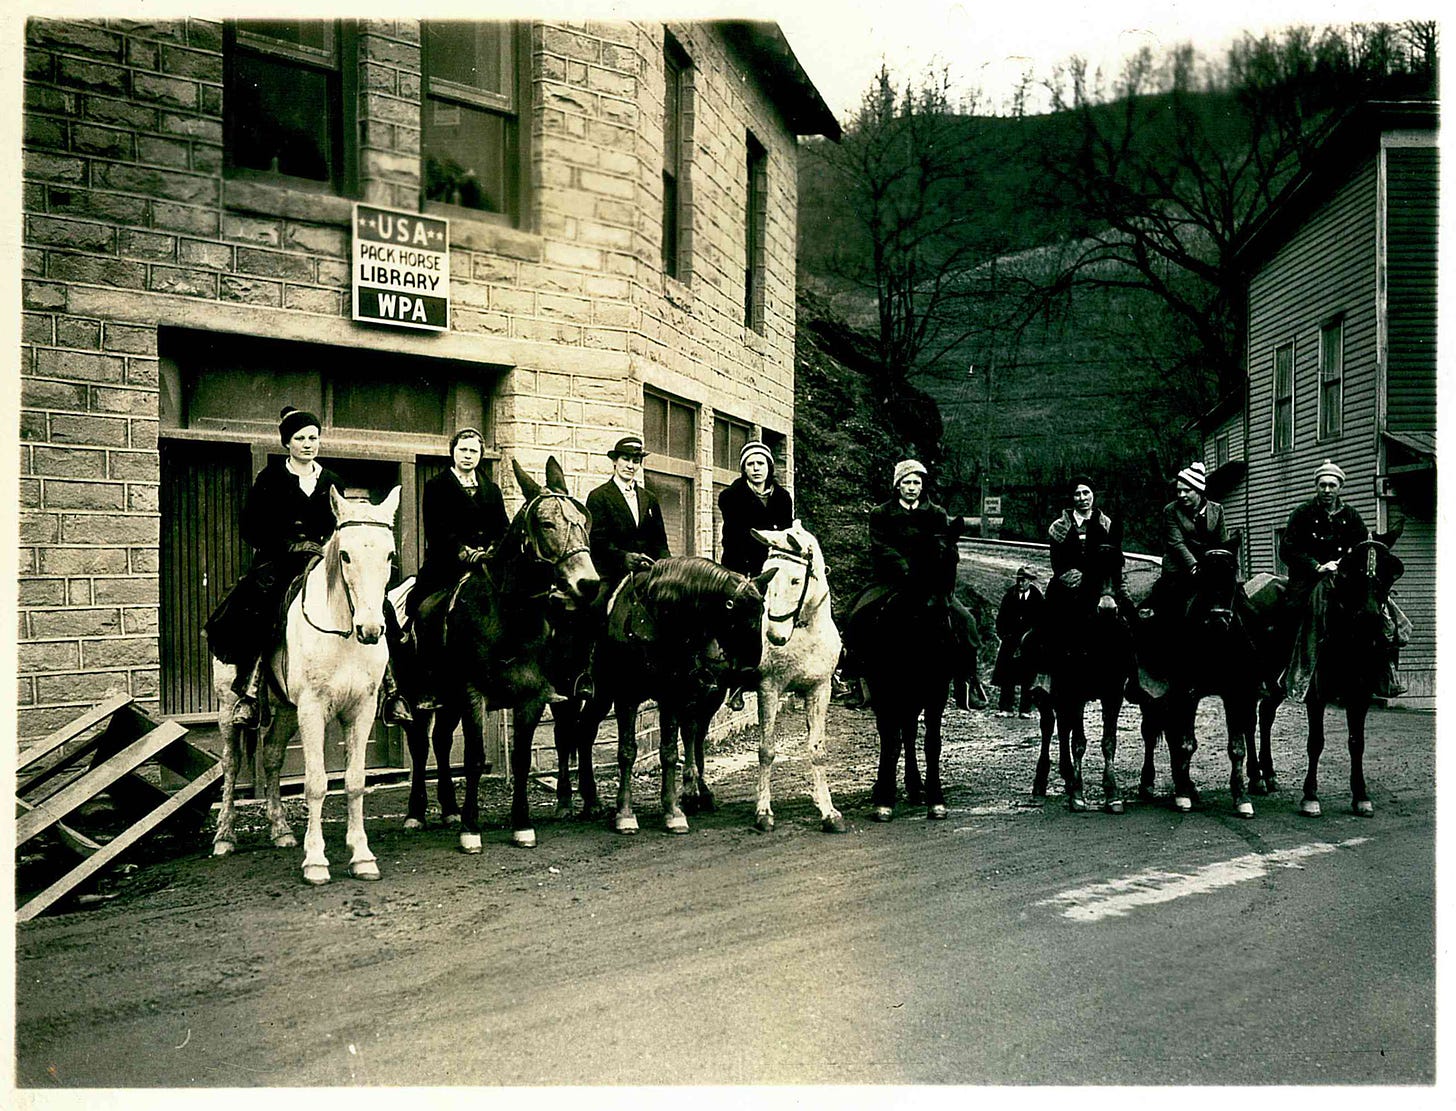 Eight women in warm clothing sit astride horses on a street. A sign behind them says USA Pack Horse Library WPA. The image is black and white, and is from 1938